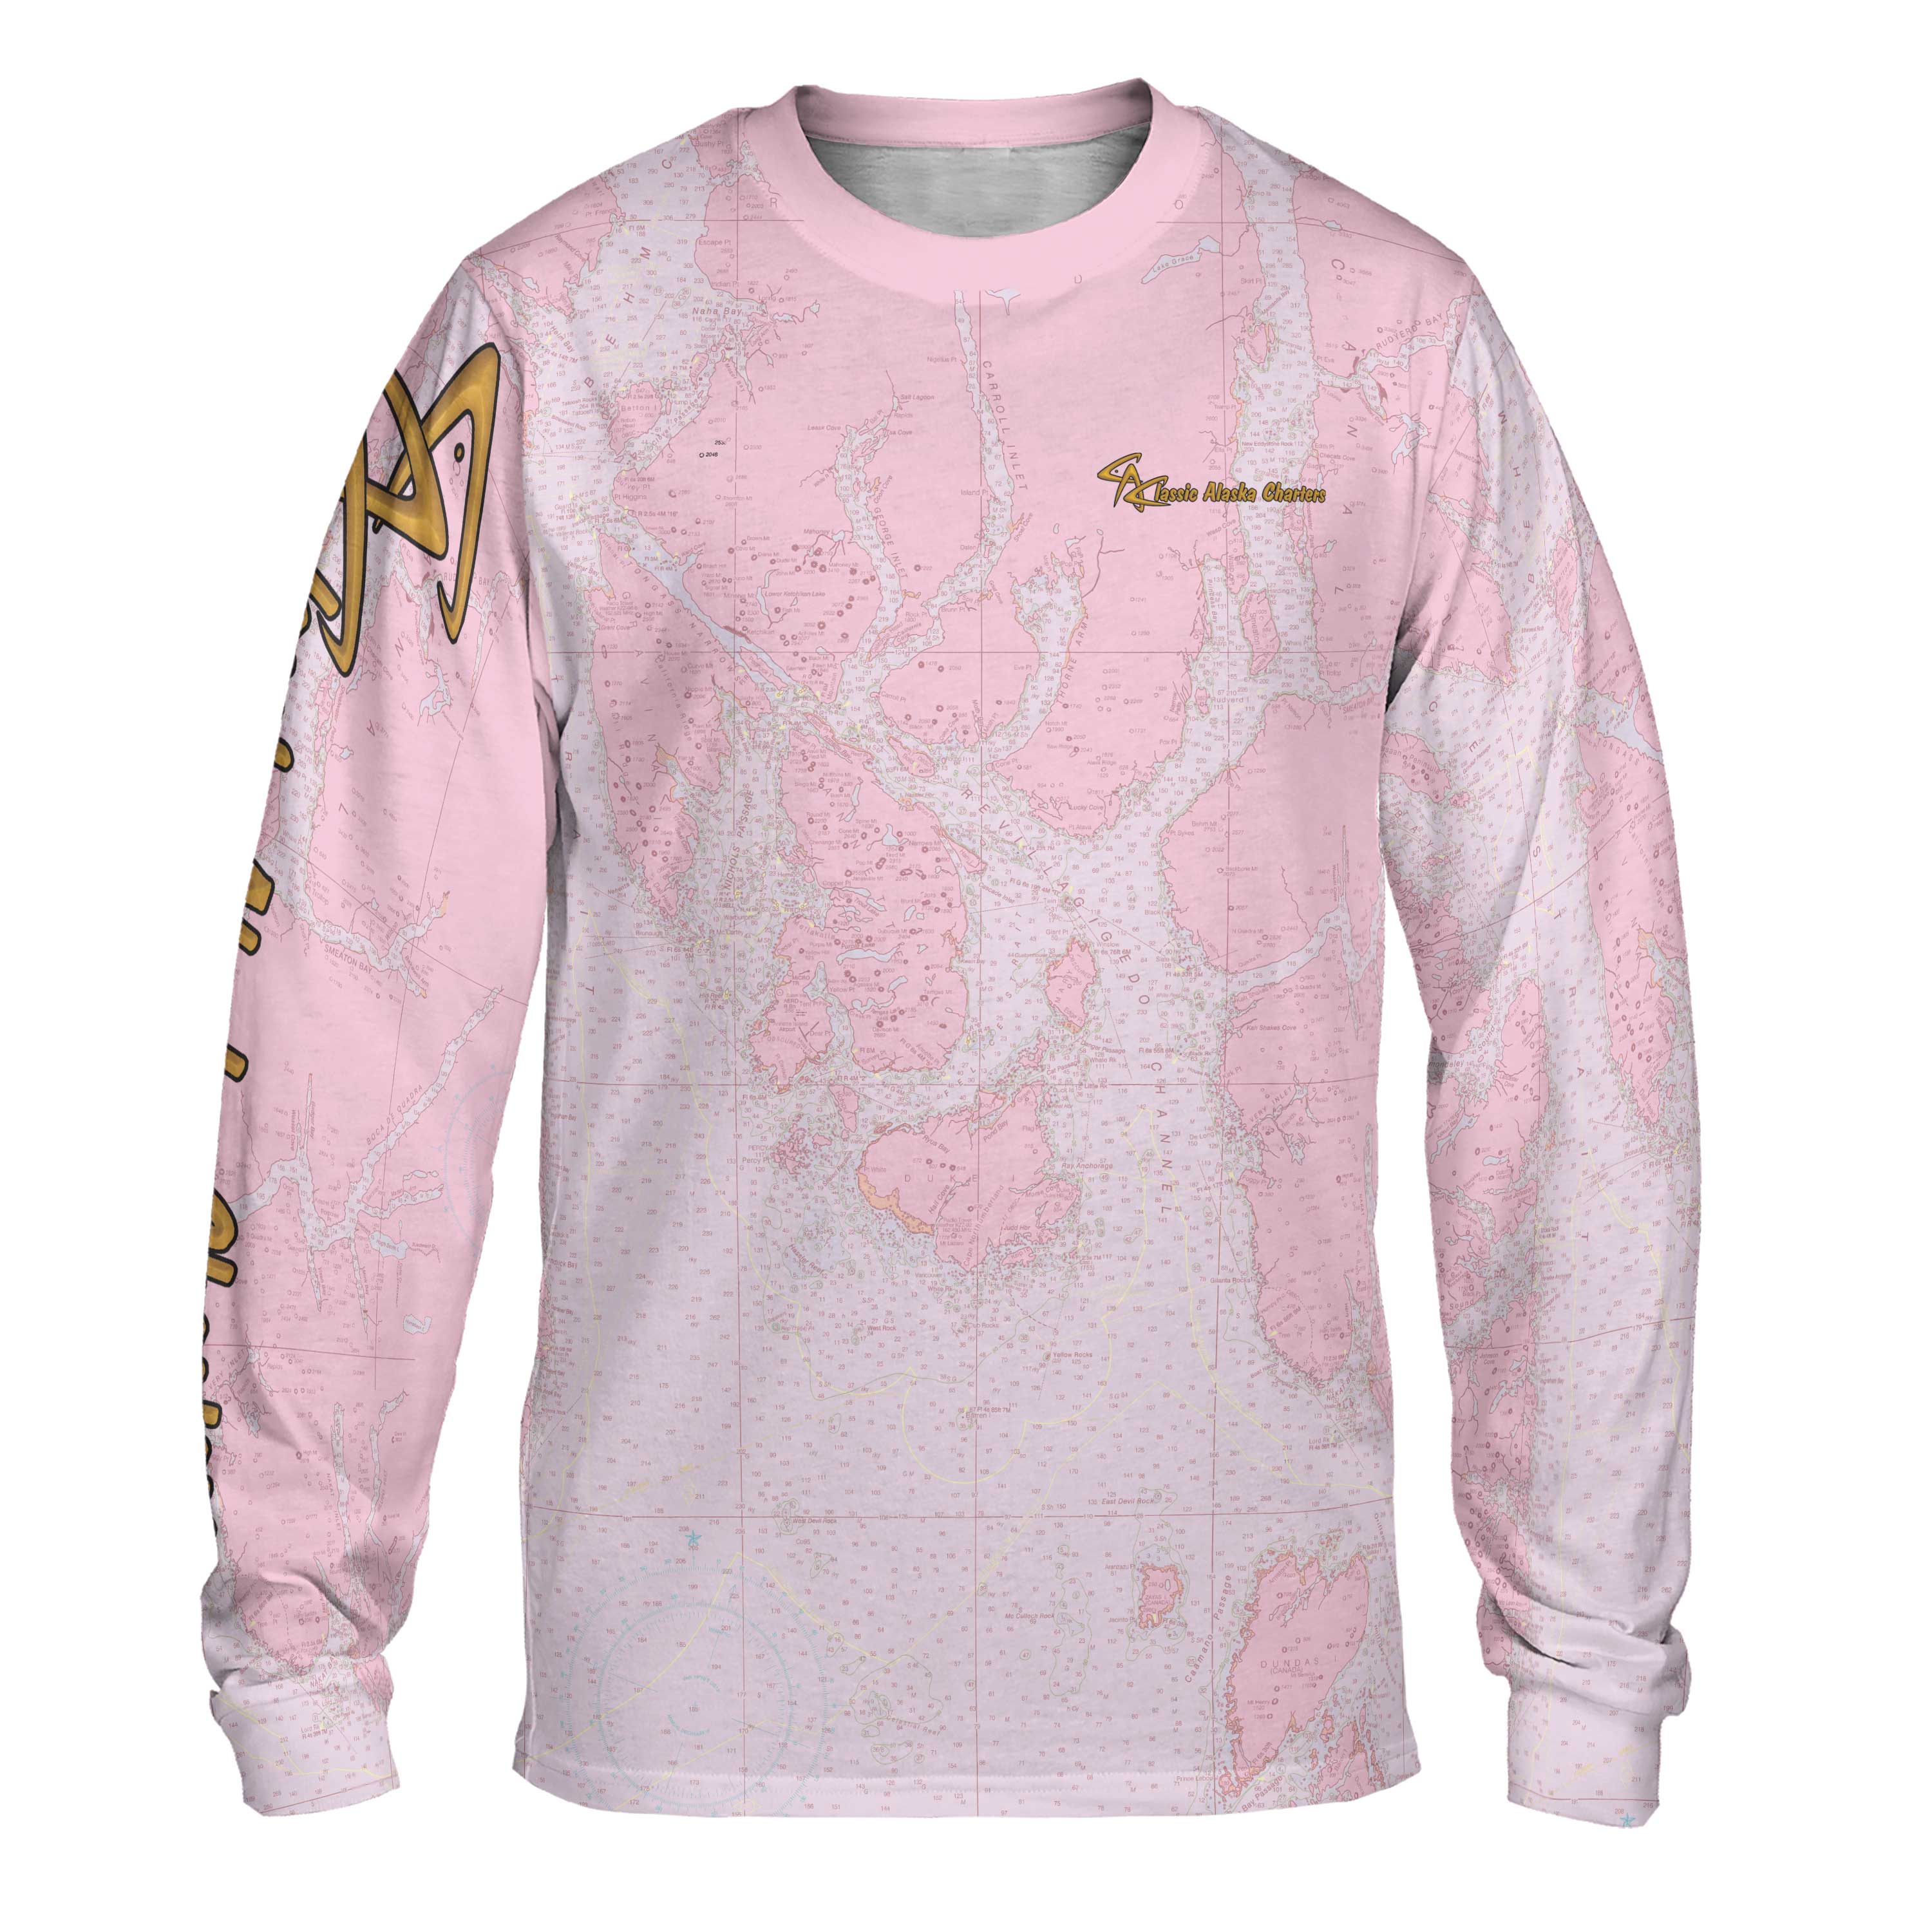 The Pink CAC Ketchikan Youth Long Sleeve Performance Tee